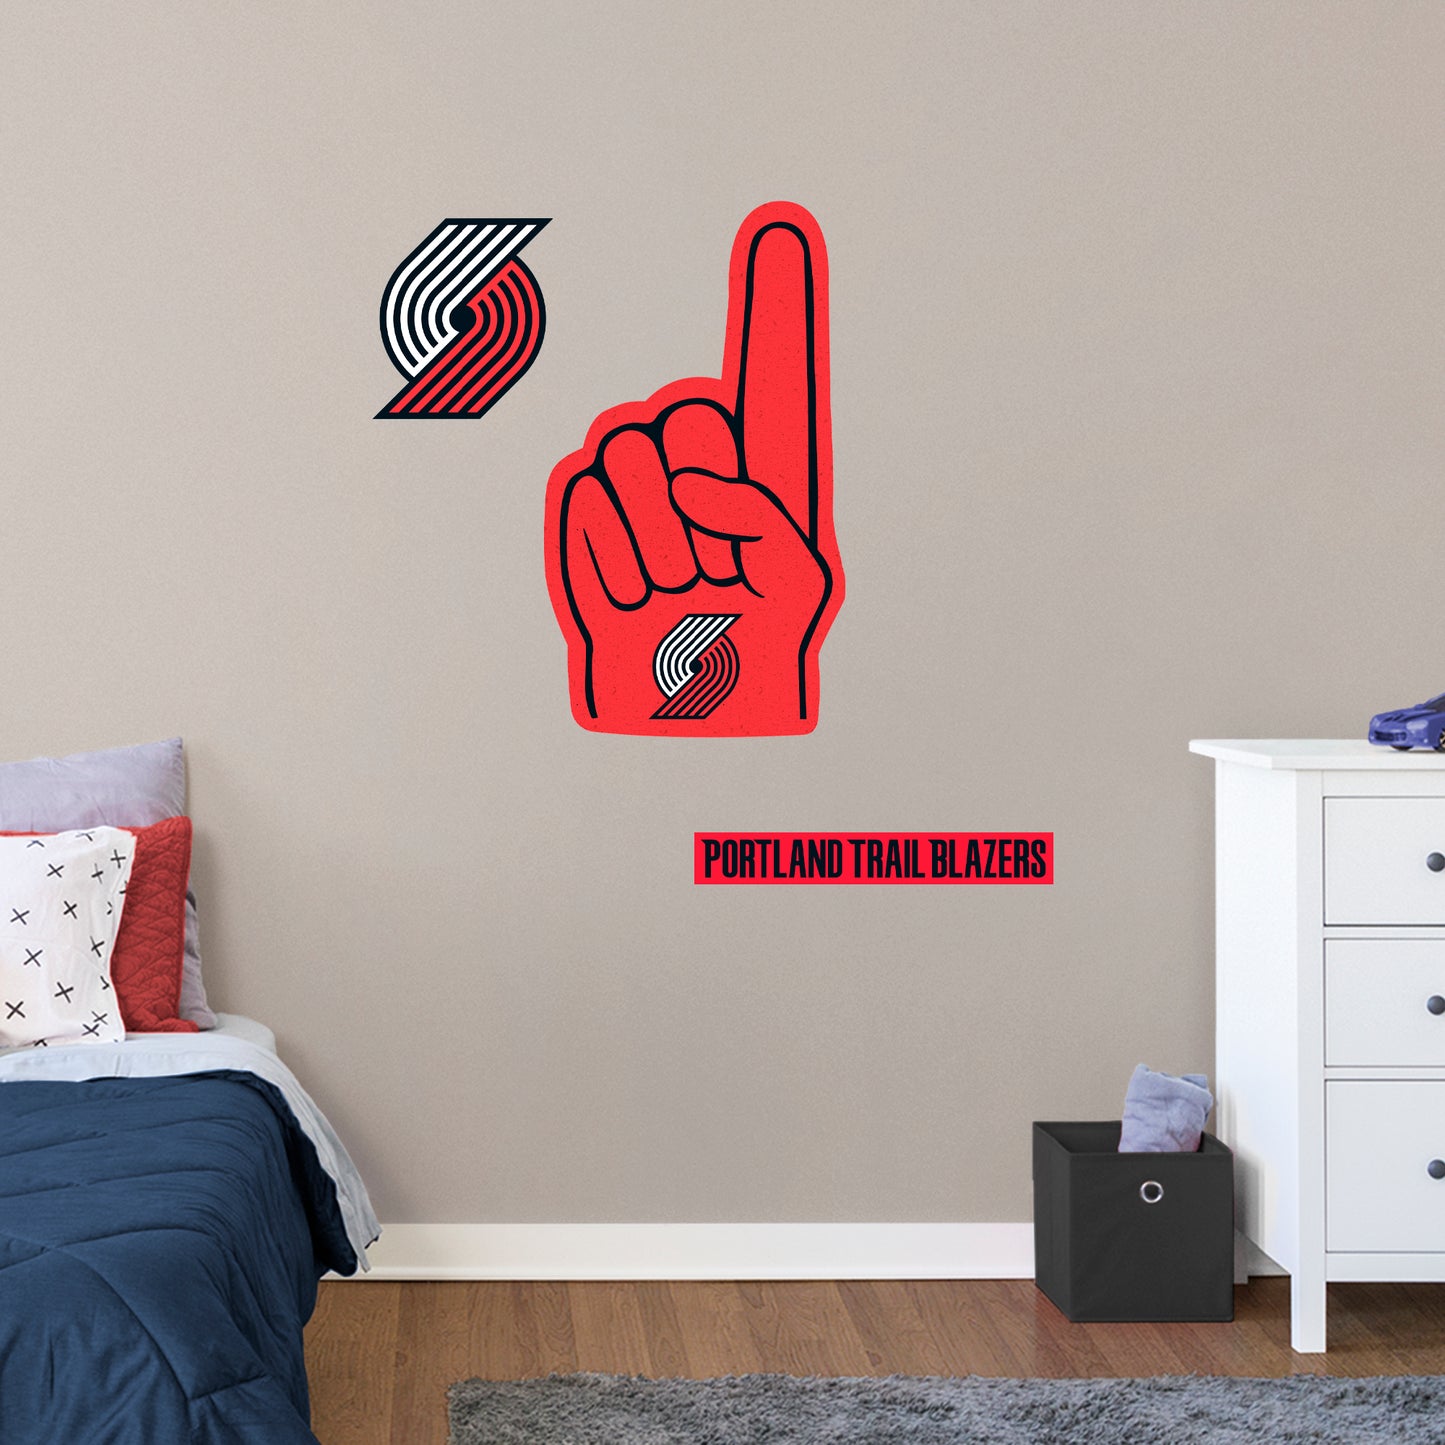 Portland Trail Blazers: Foam Finger - Officially Licensed NBA Removable Adhesive Decal